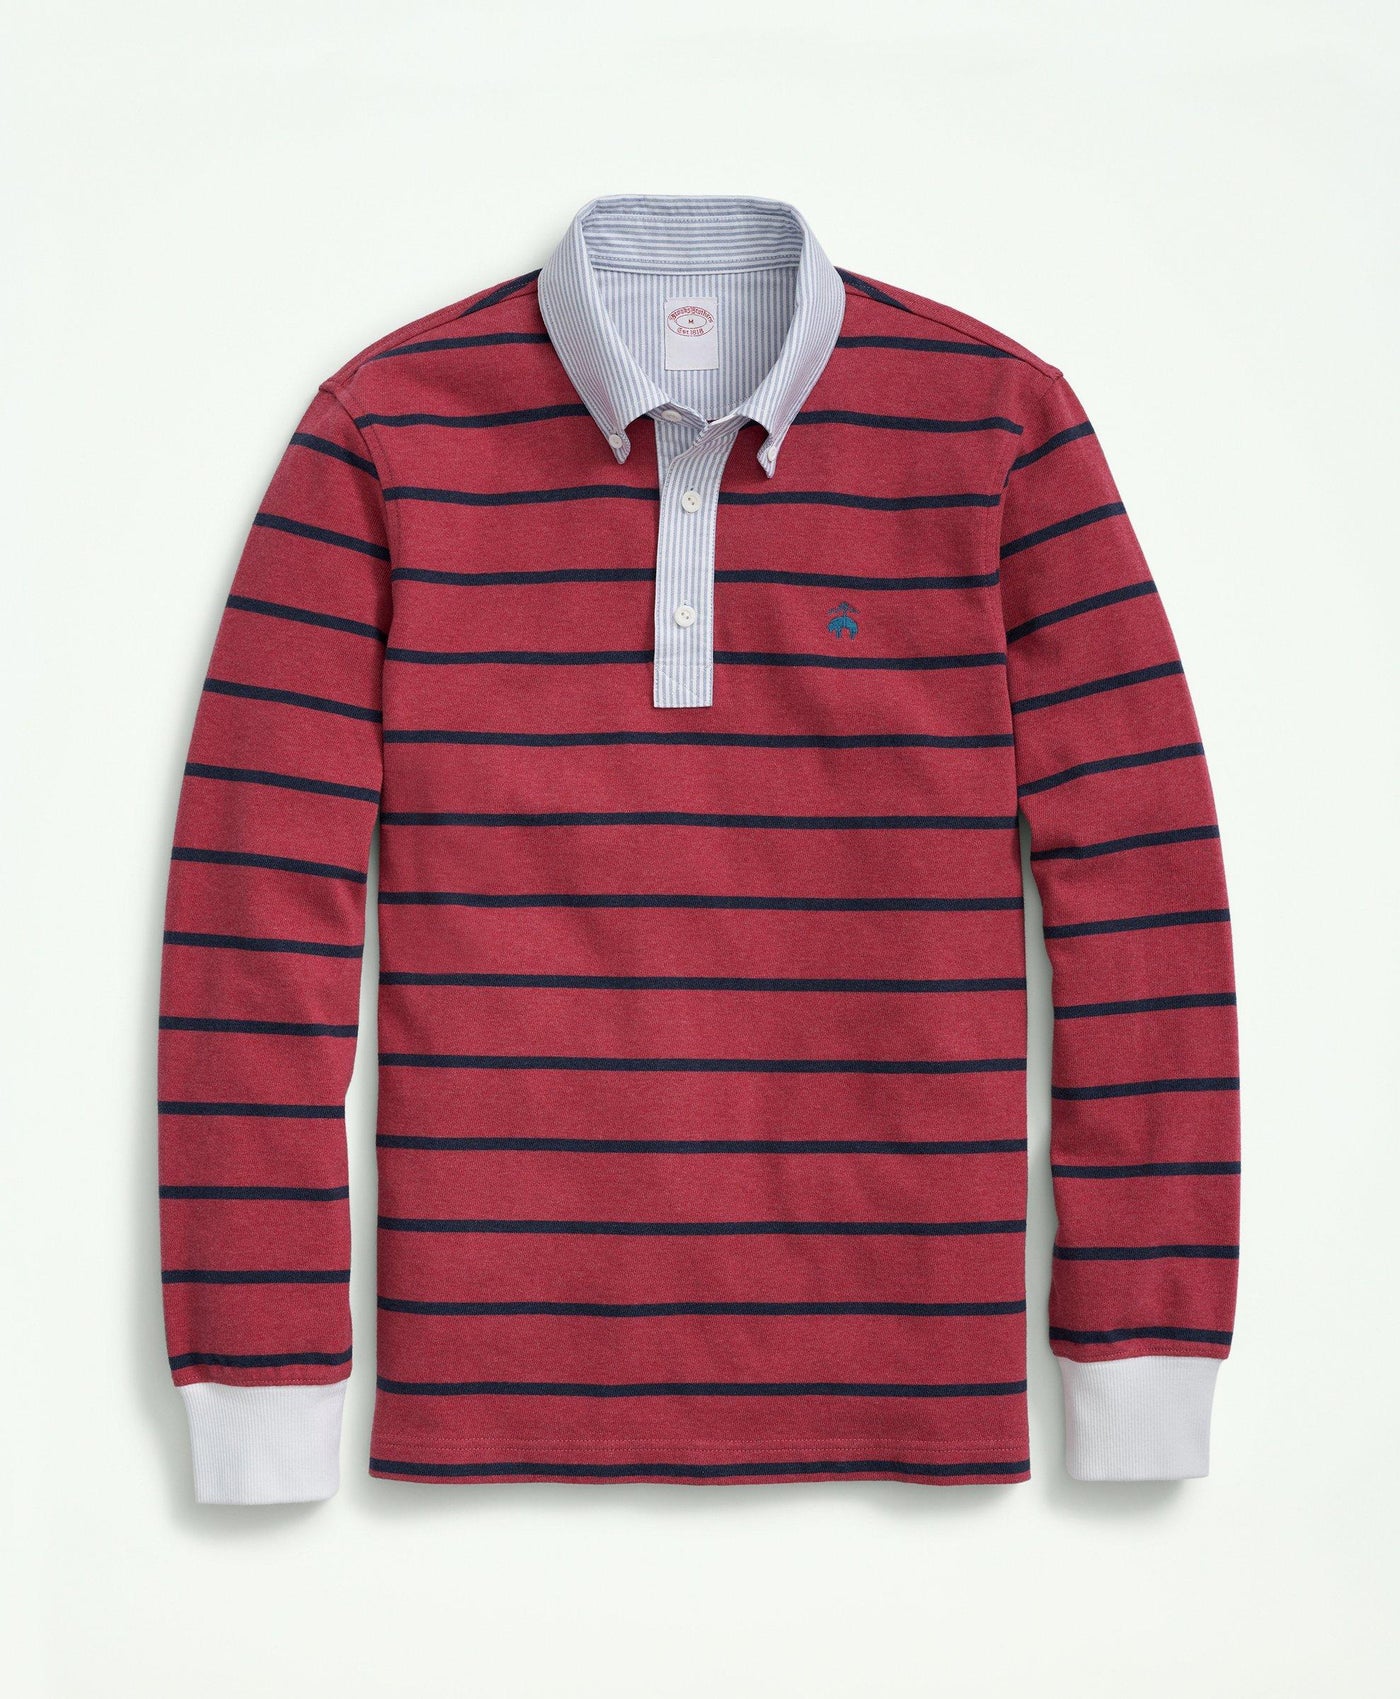 Cotton BB#3 Stripe Rugby Shirt - Brooks Brothers Canada